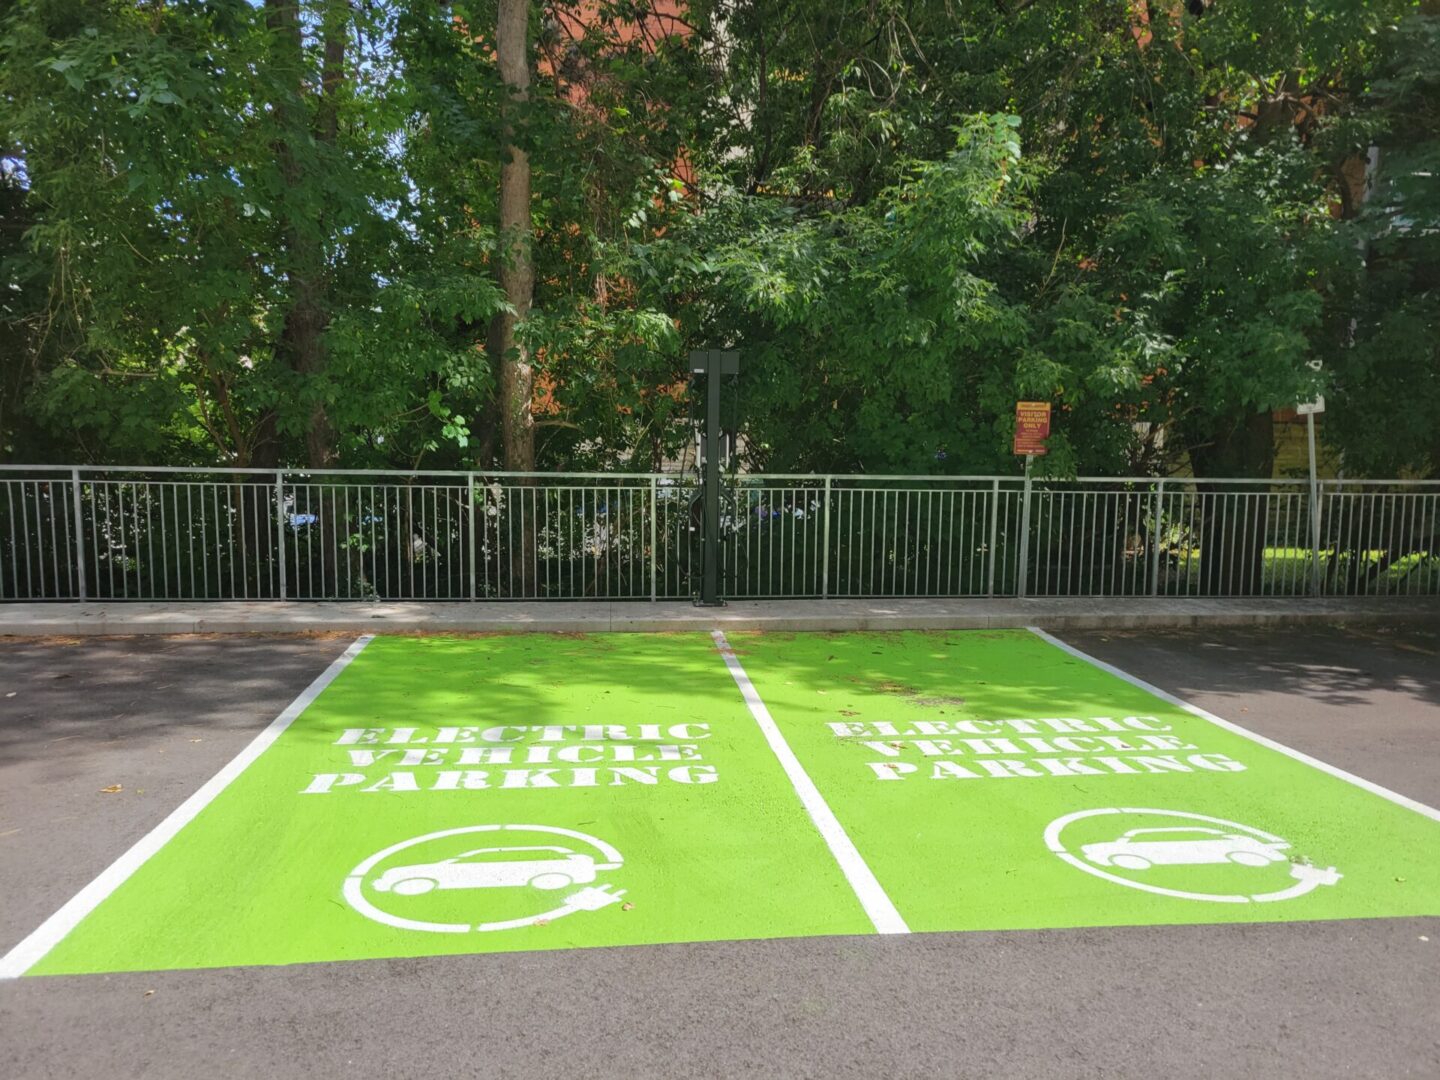 Electric vehicle parking